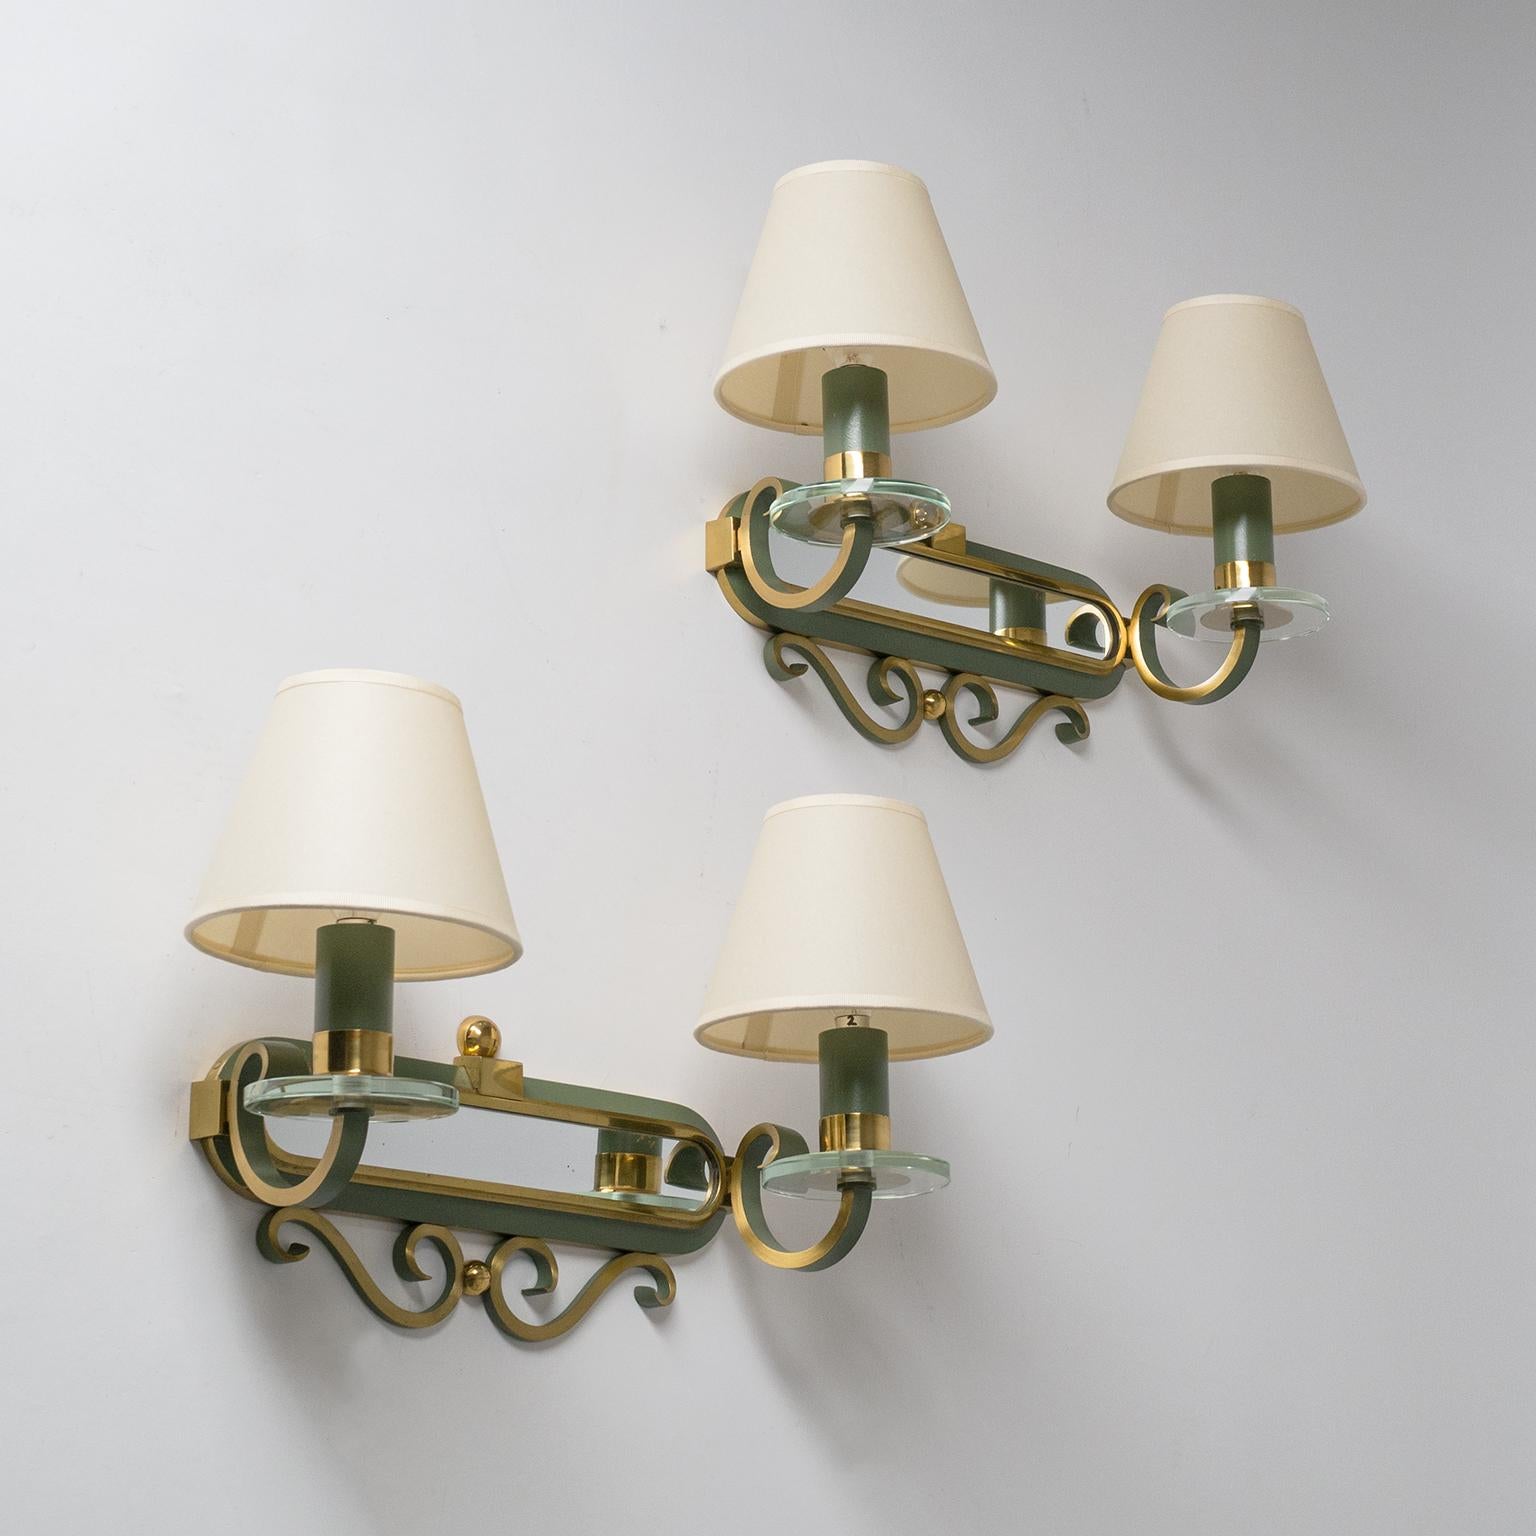 Fine pair of large French Art Deco wall lights from the 1940s. Built entirely in brass combining various finishes: polished, brushed and lacquered in a pastel olive color. In addition each arm sports a glass disc and the backplates have a mirror